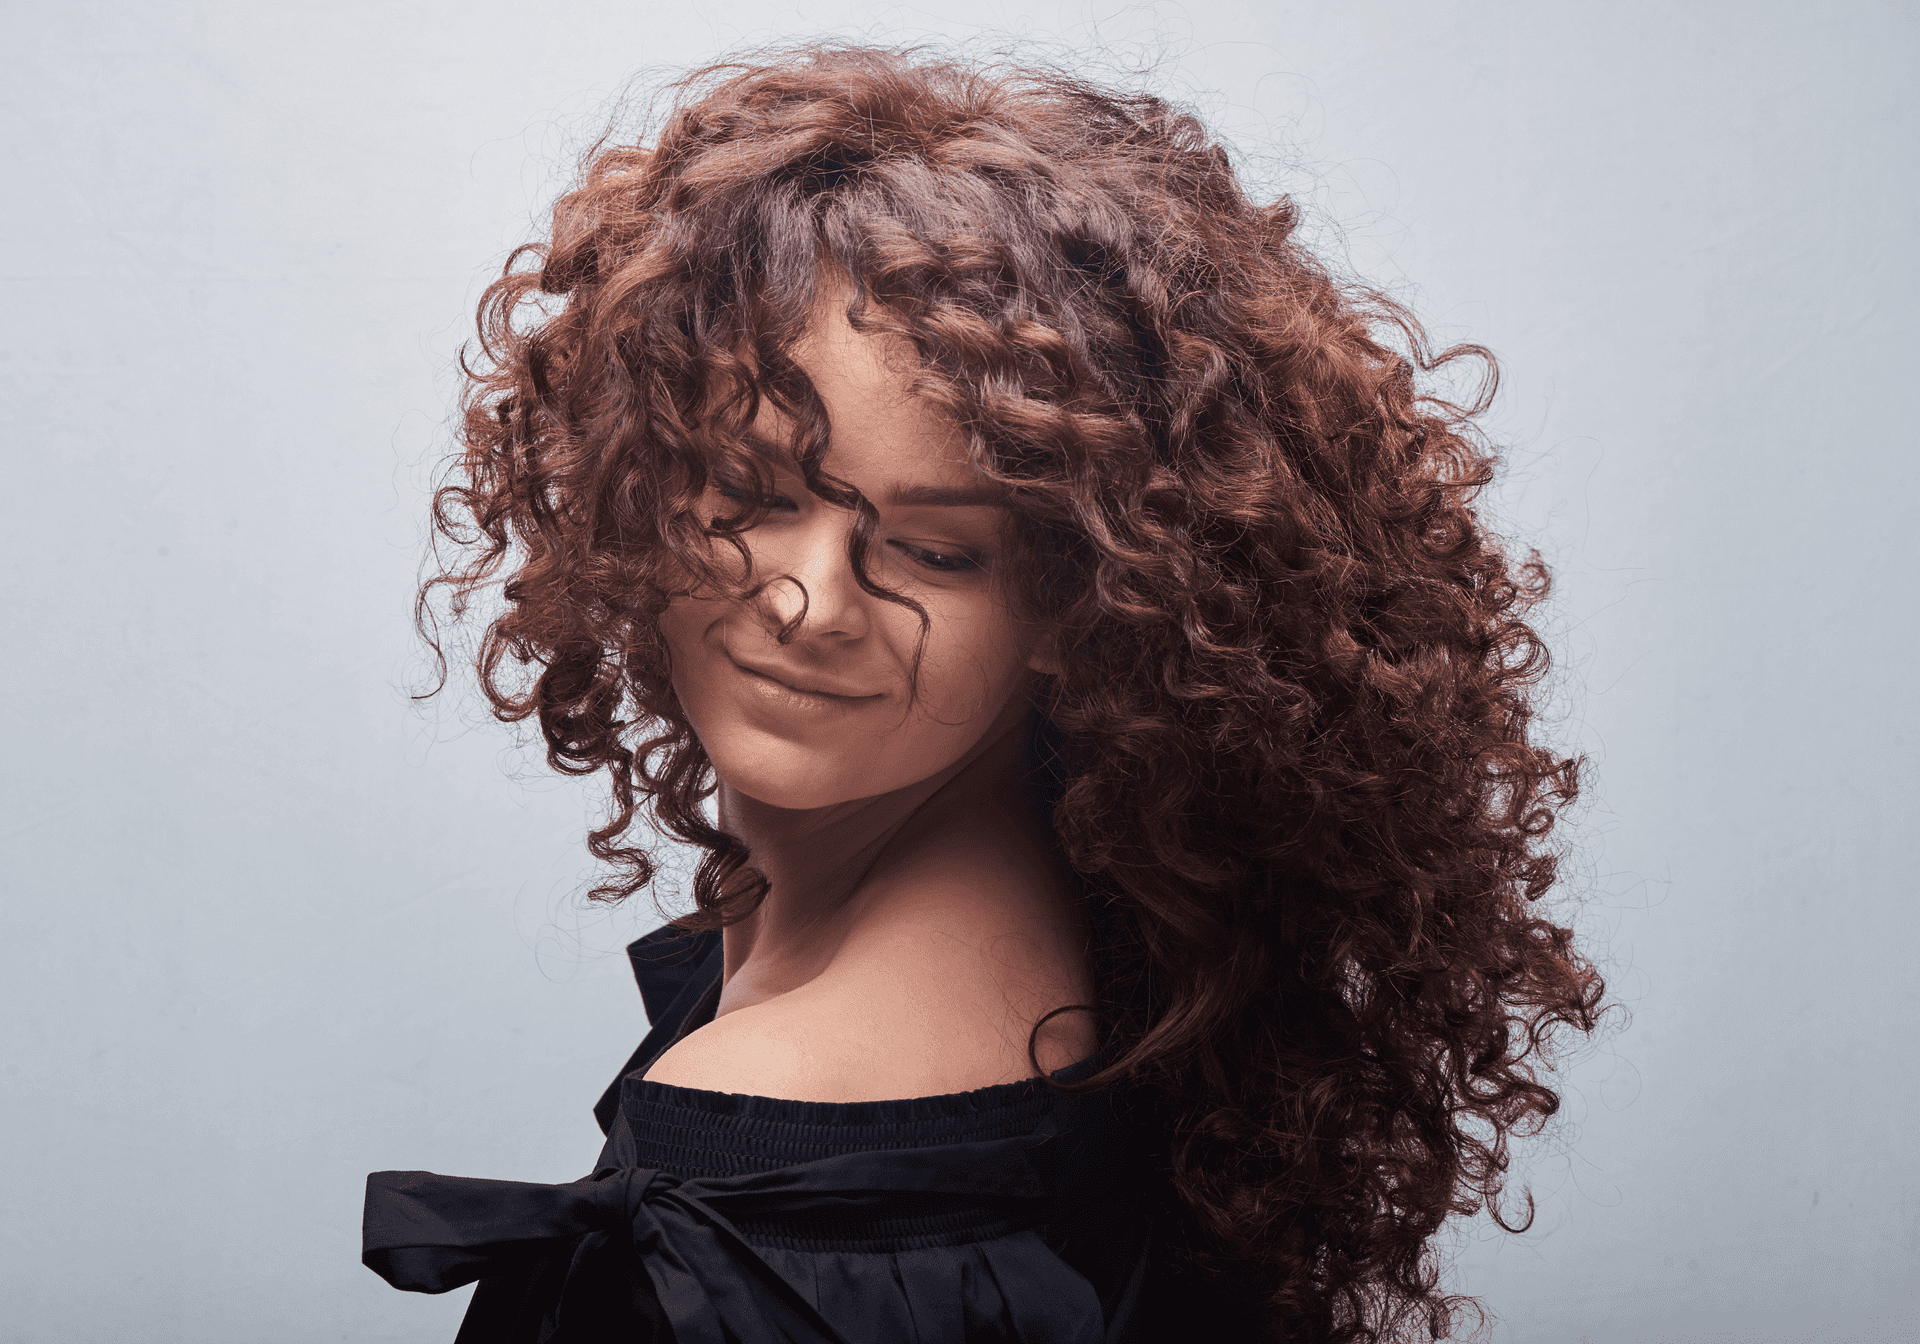 Woman with curly hair smiling with closed eyes.